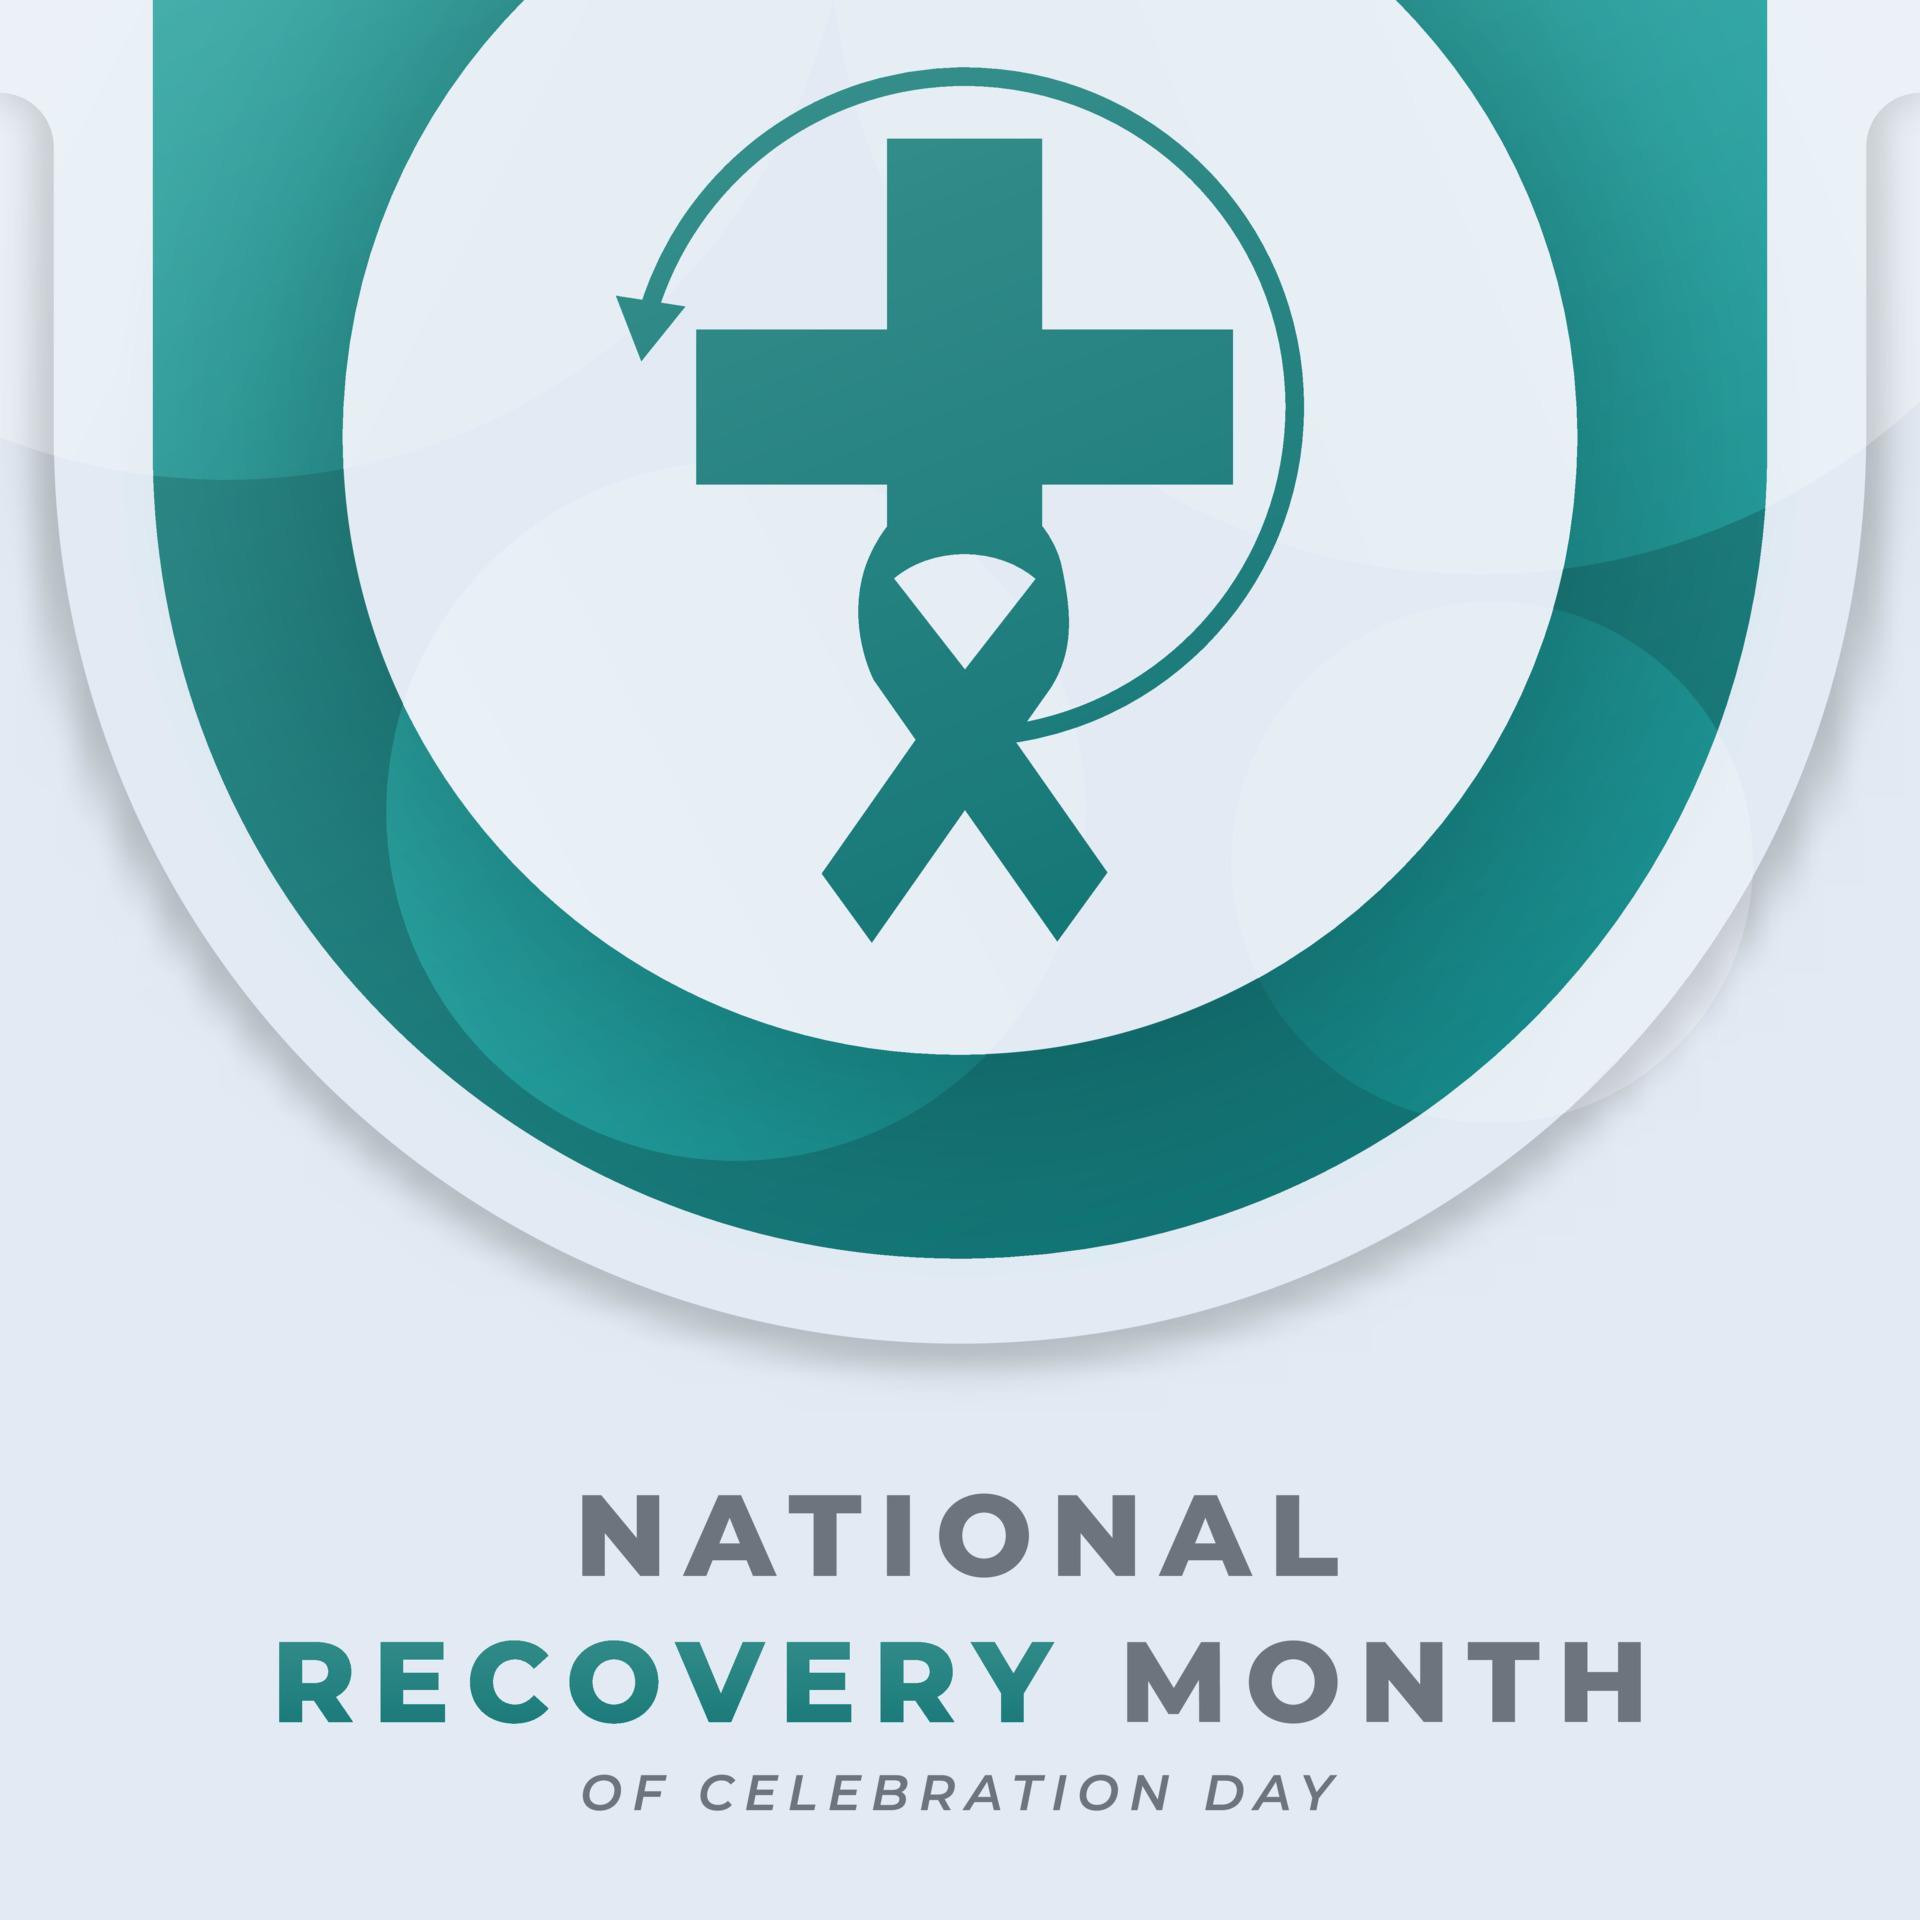 Happy National Recovery Month Celebration Vector Design Illustration